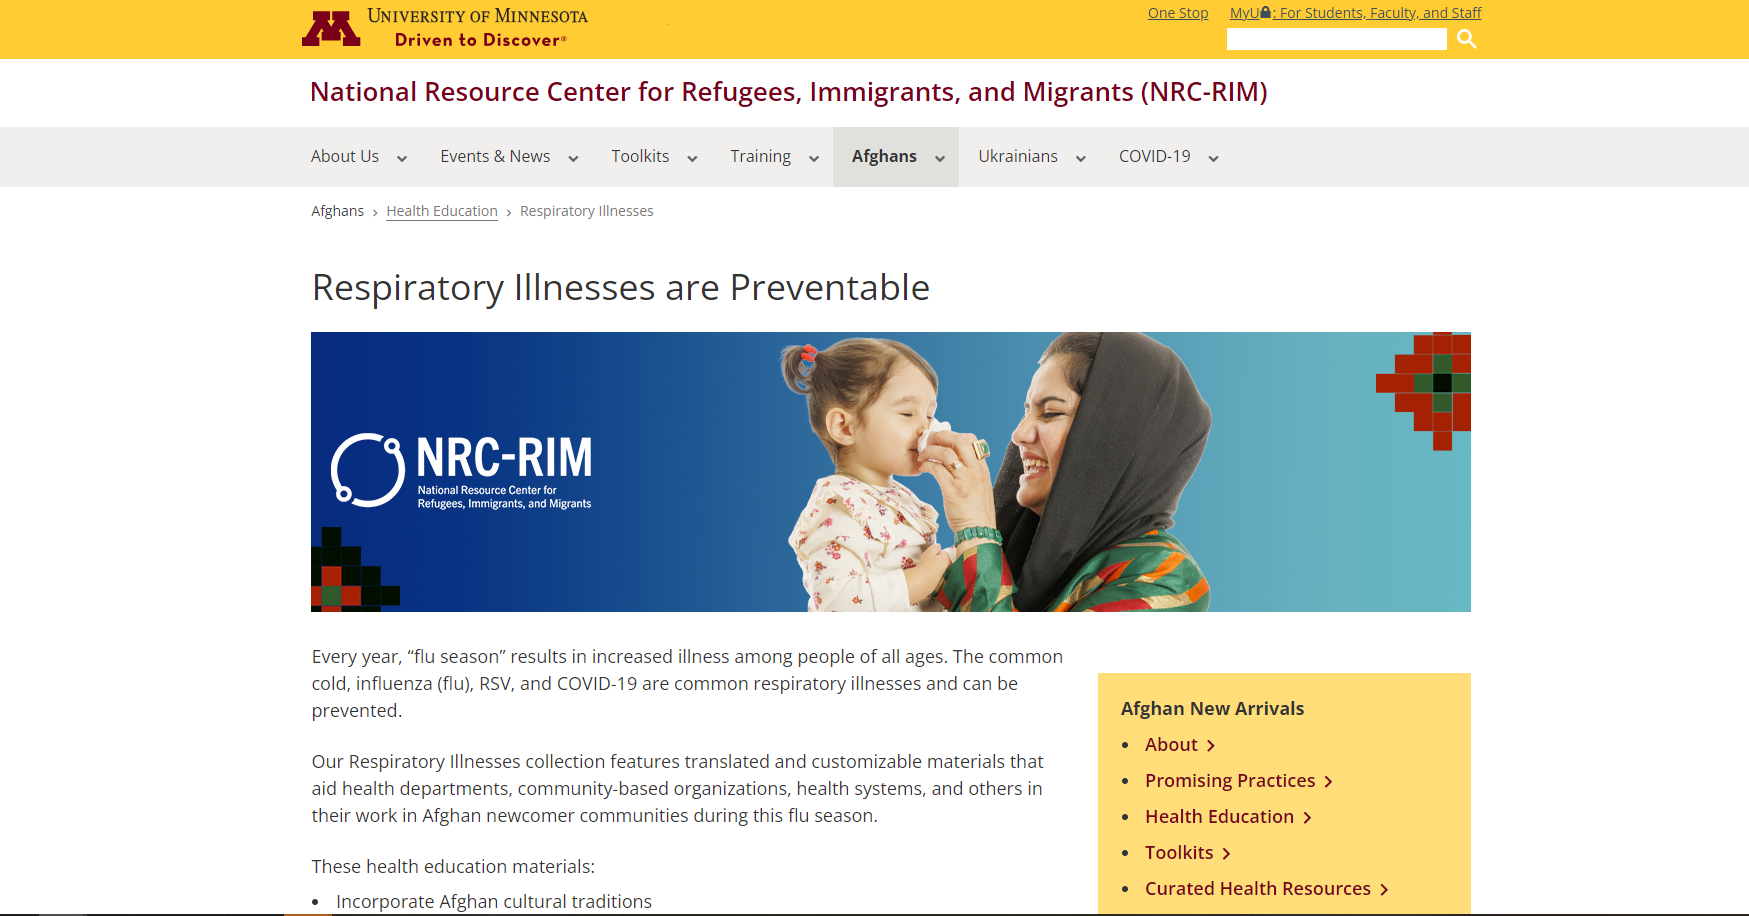 Screen capture of a web page with an image of a woman wearing a headscarf, helping a young girl blow her nose